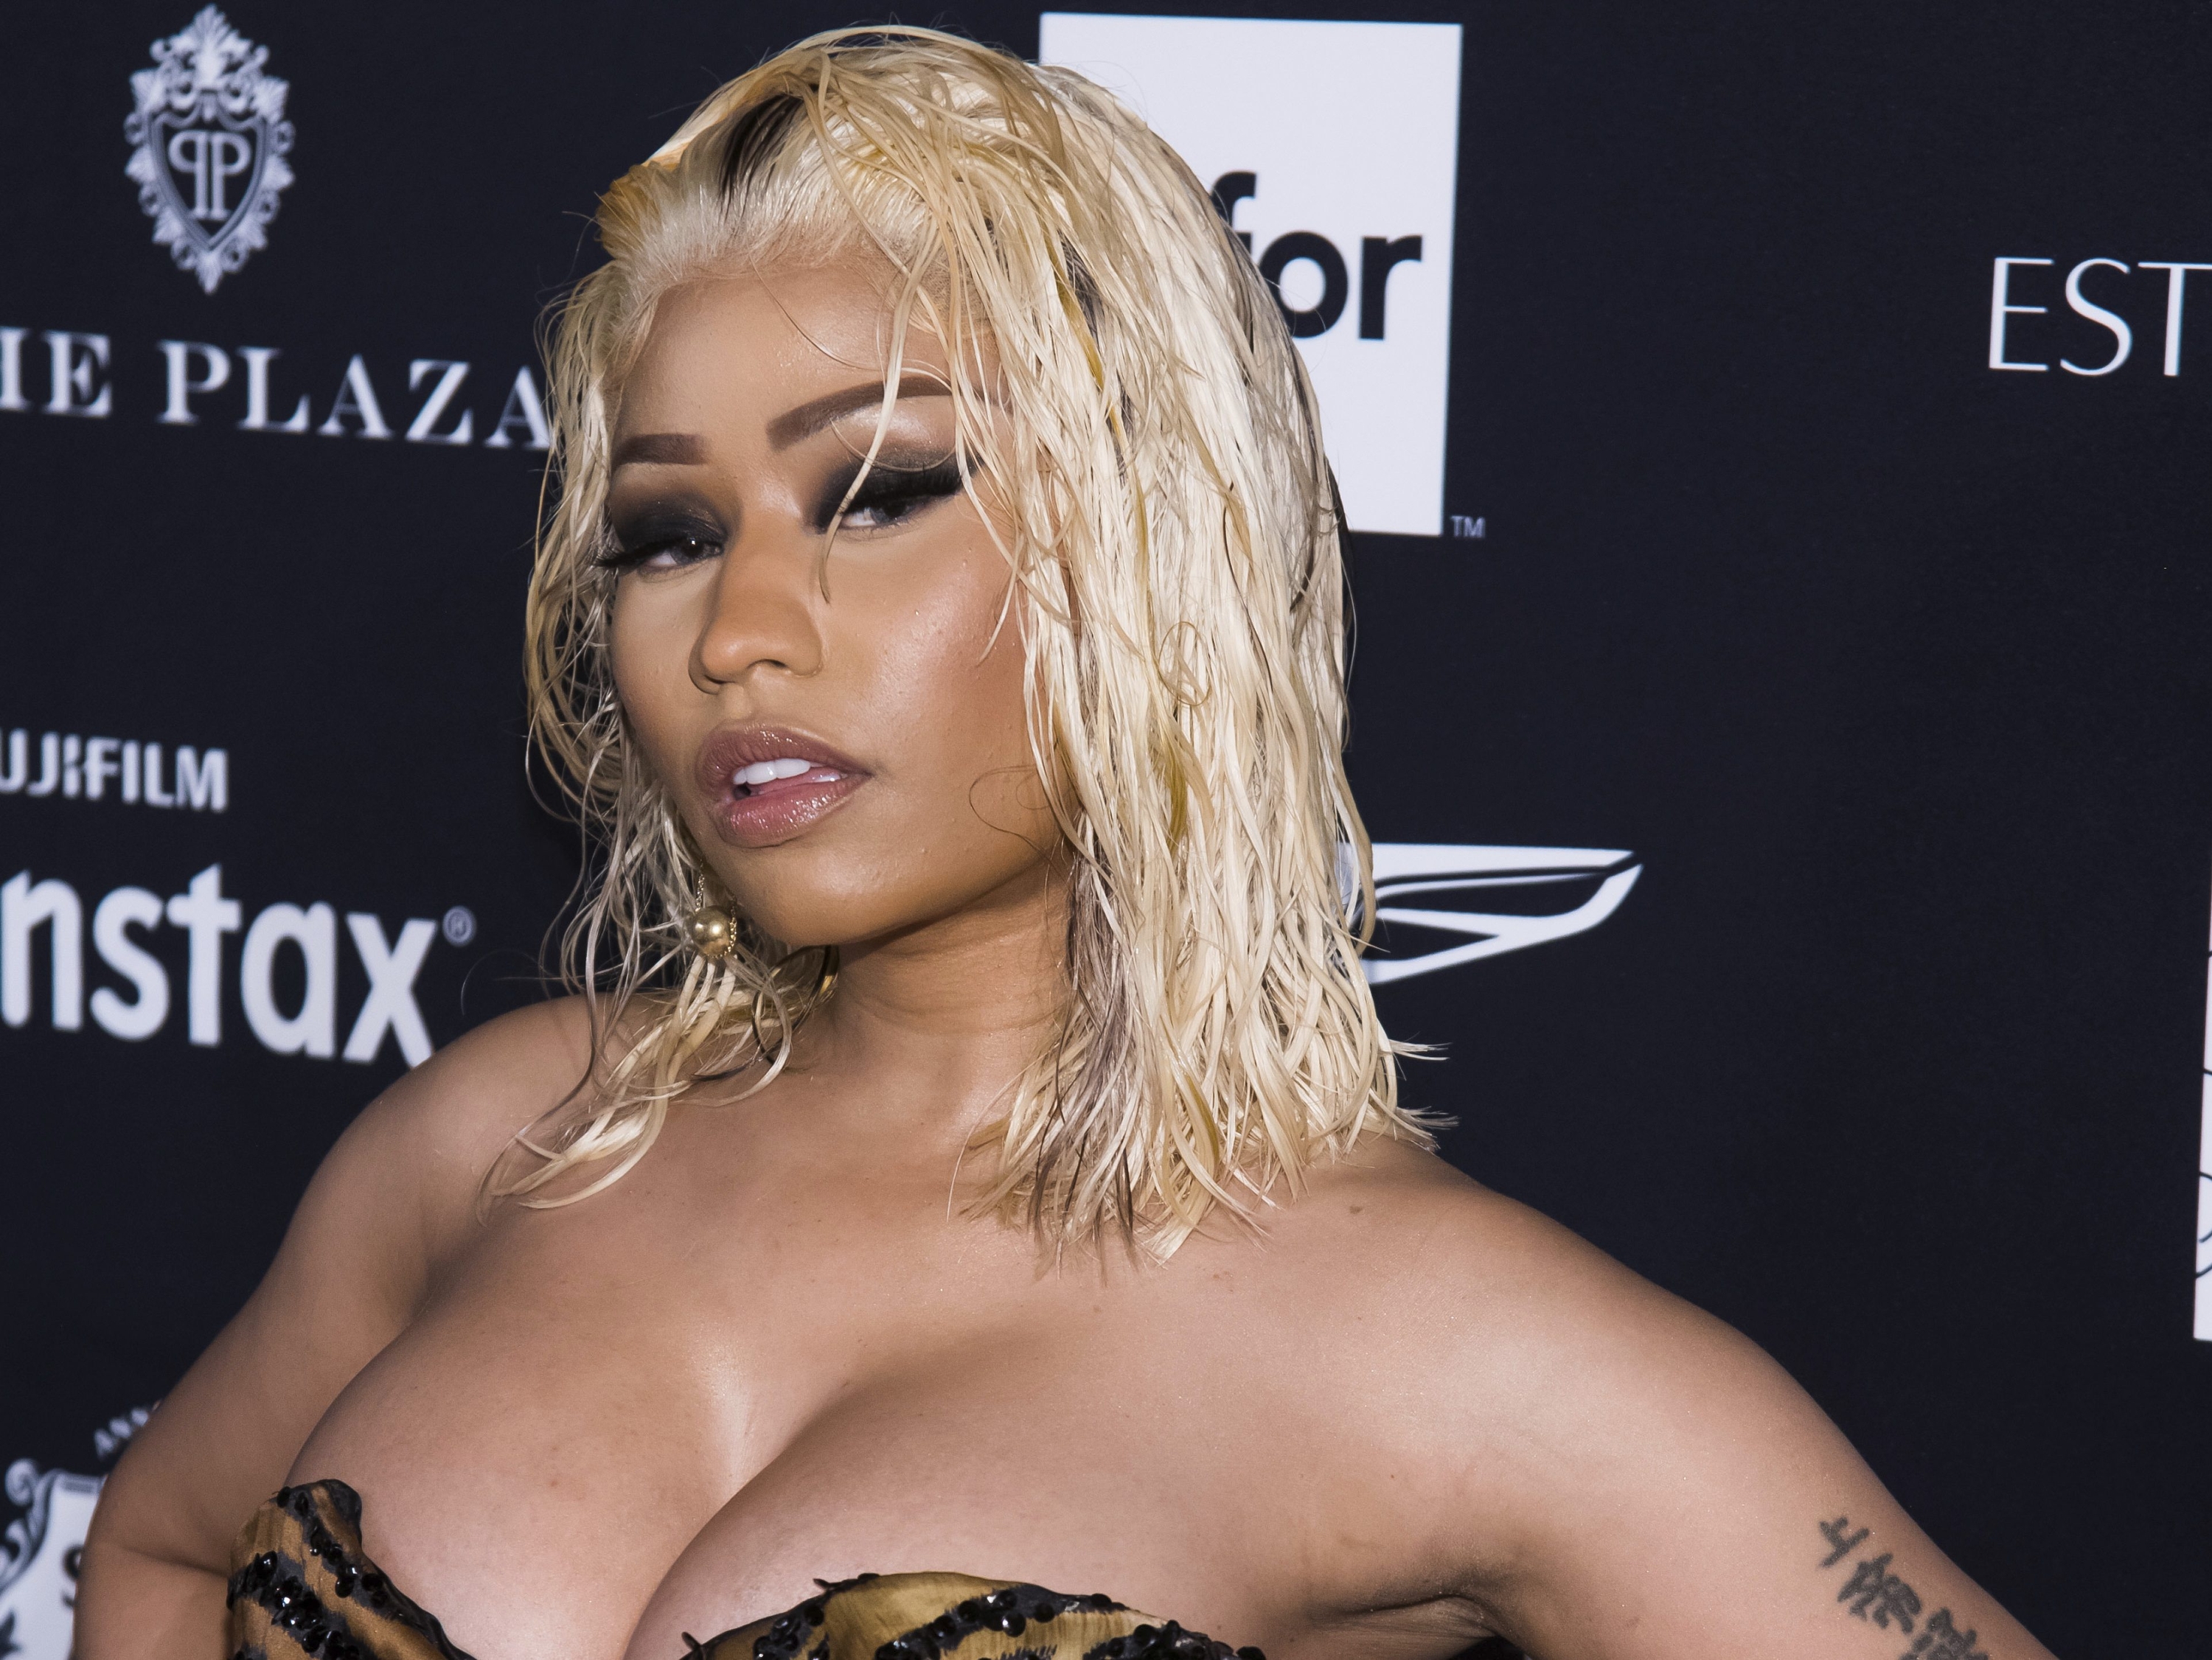 Shots Fired: Nicki Minaj launches 'Nicki Stopped My Bag' collection  inspired by Cardi B - TheGrio